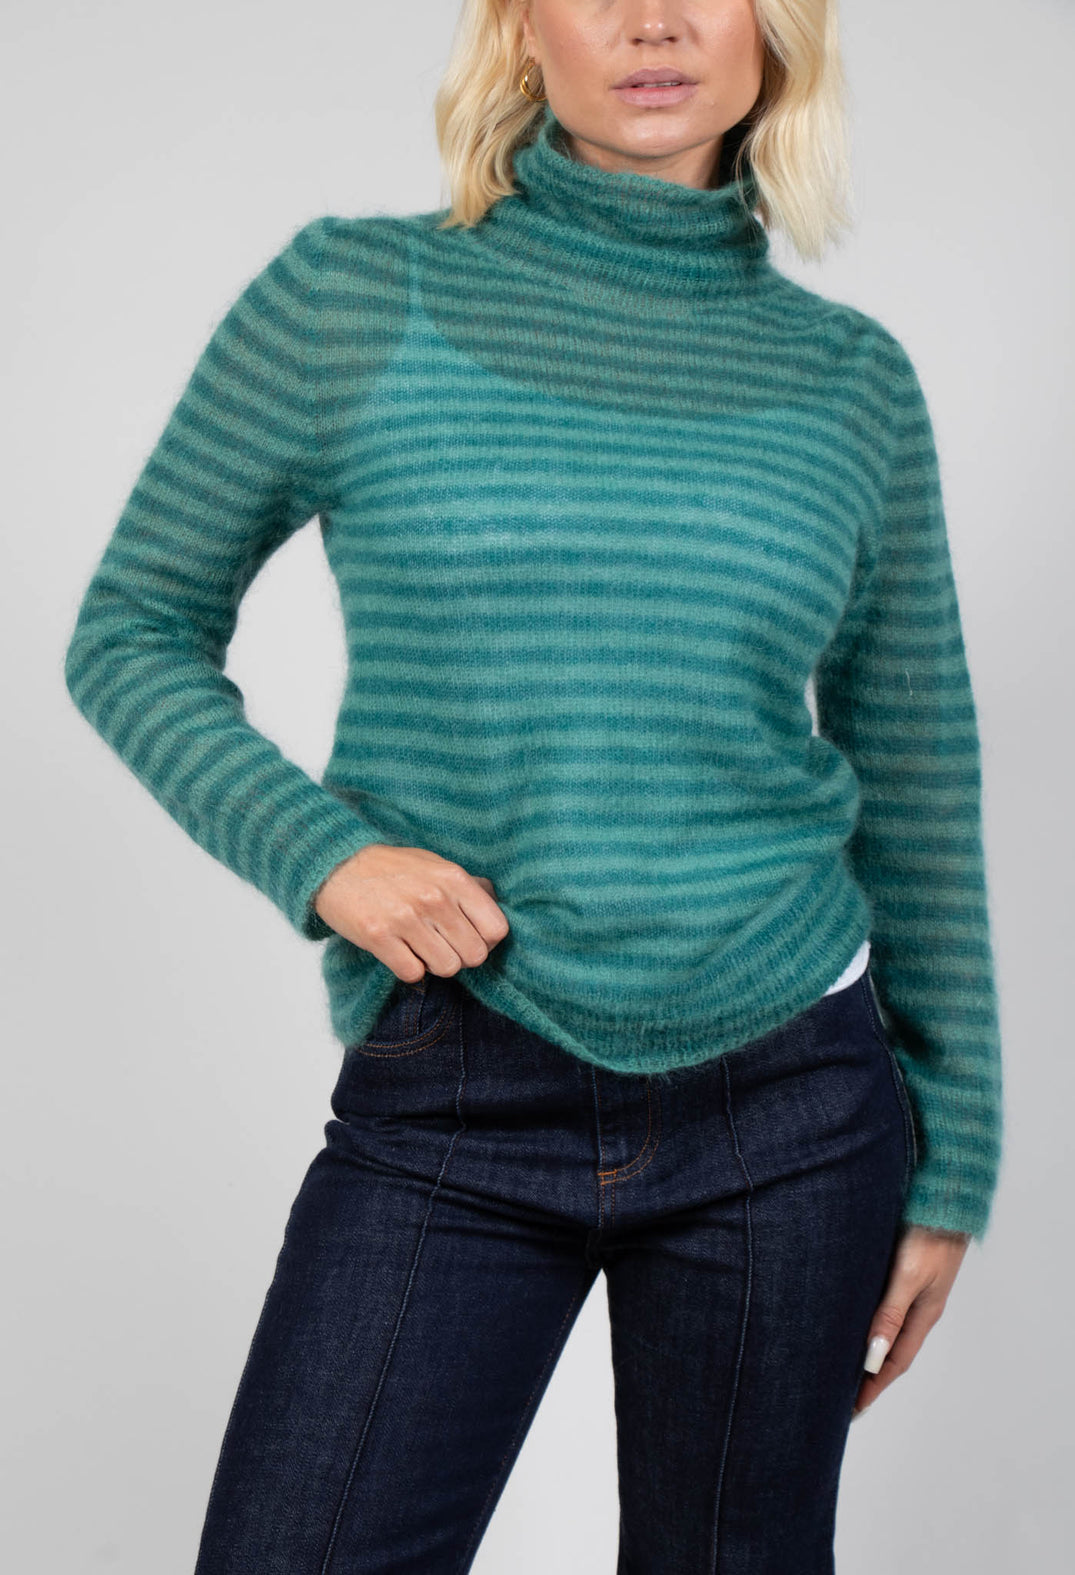 Striped Turtleneck Sweater in Teal Green